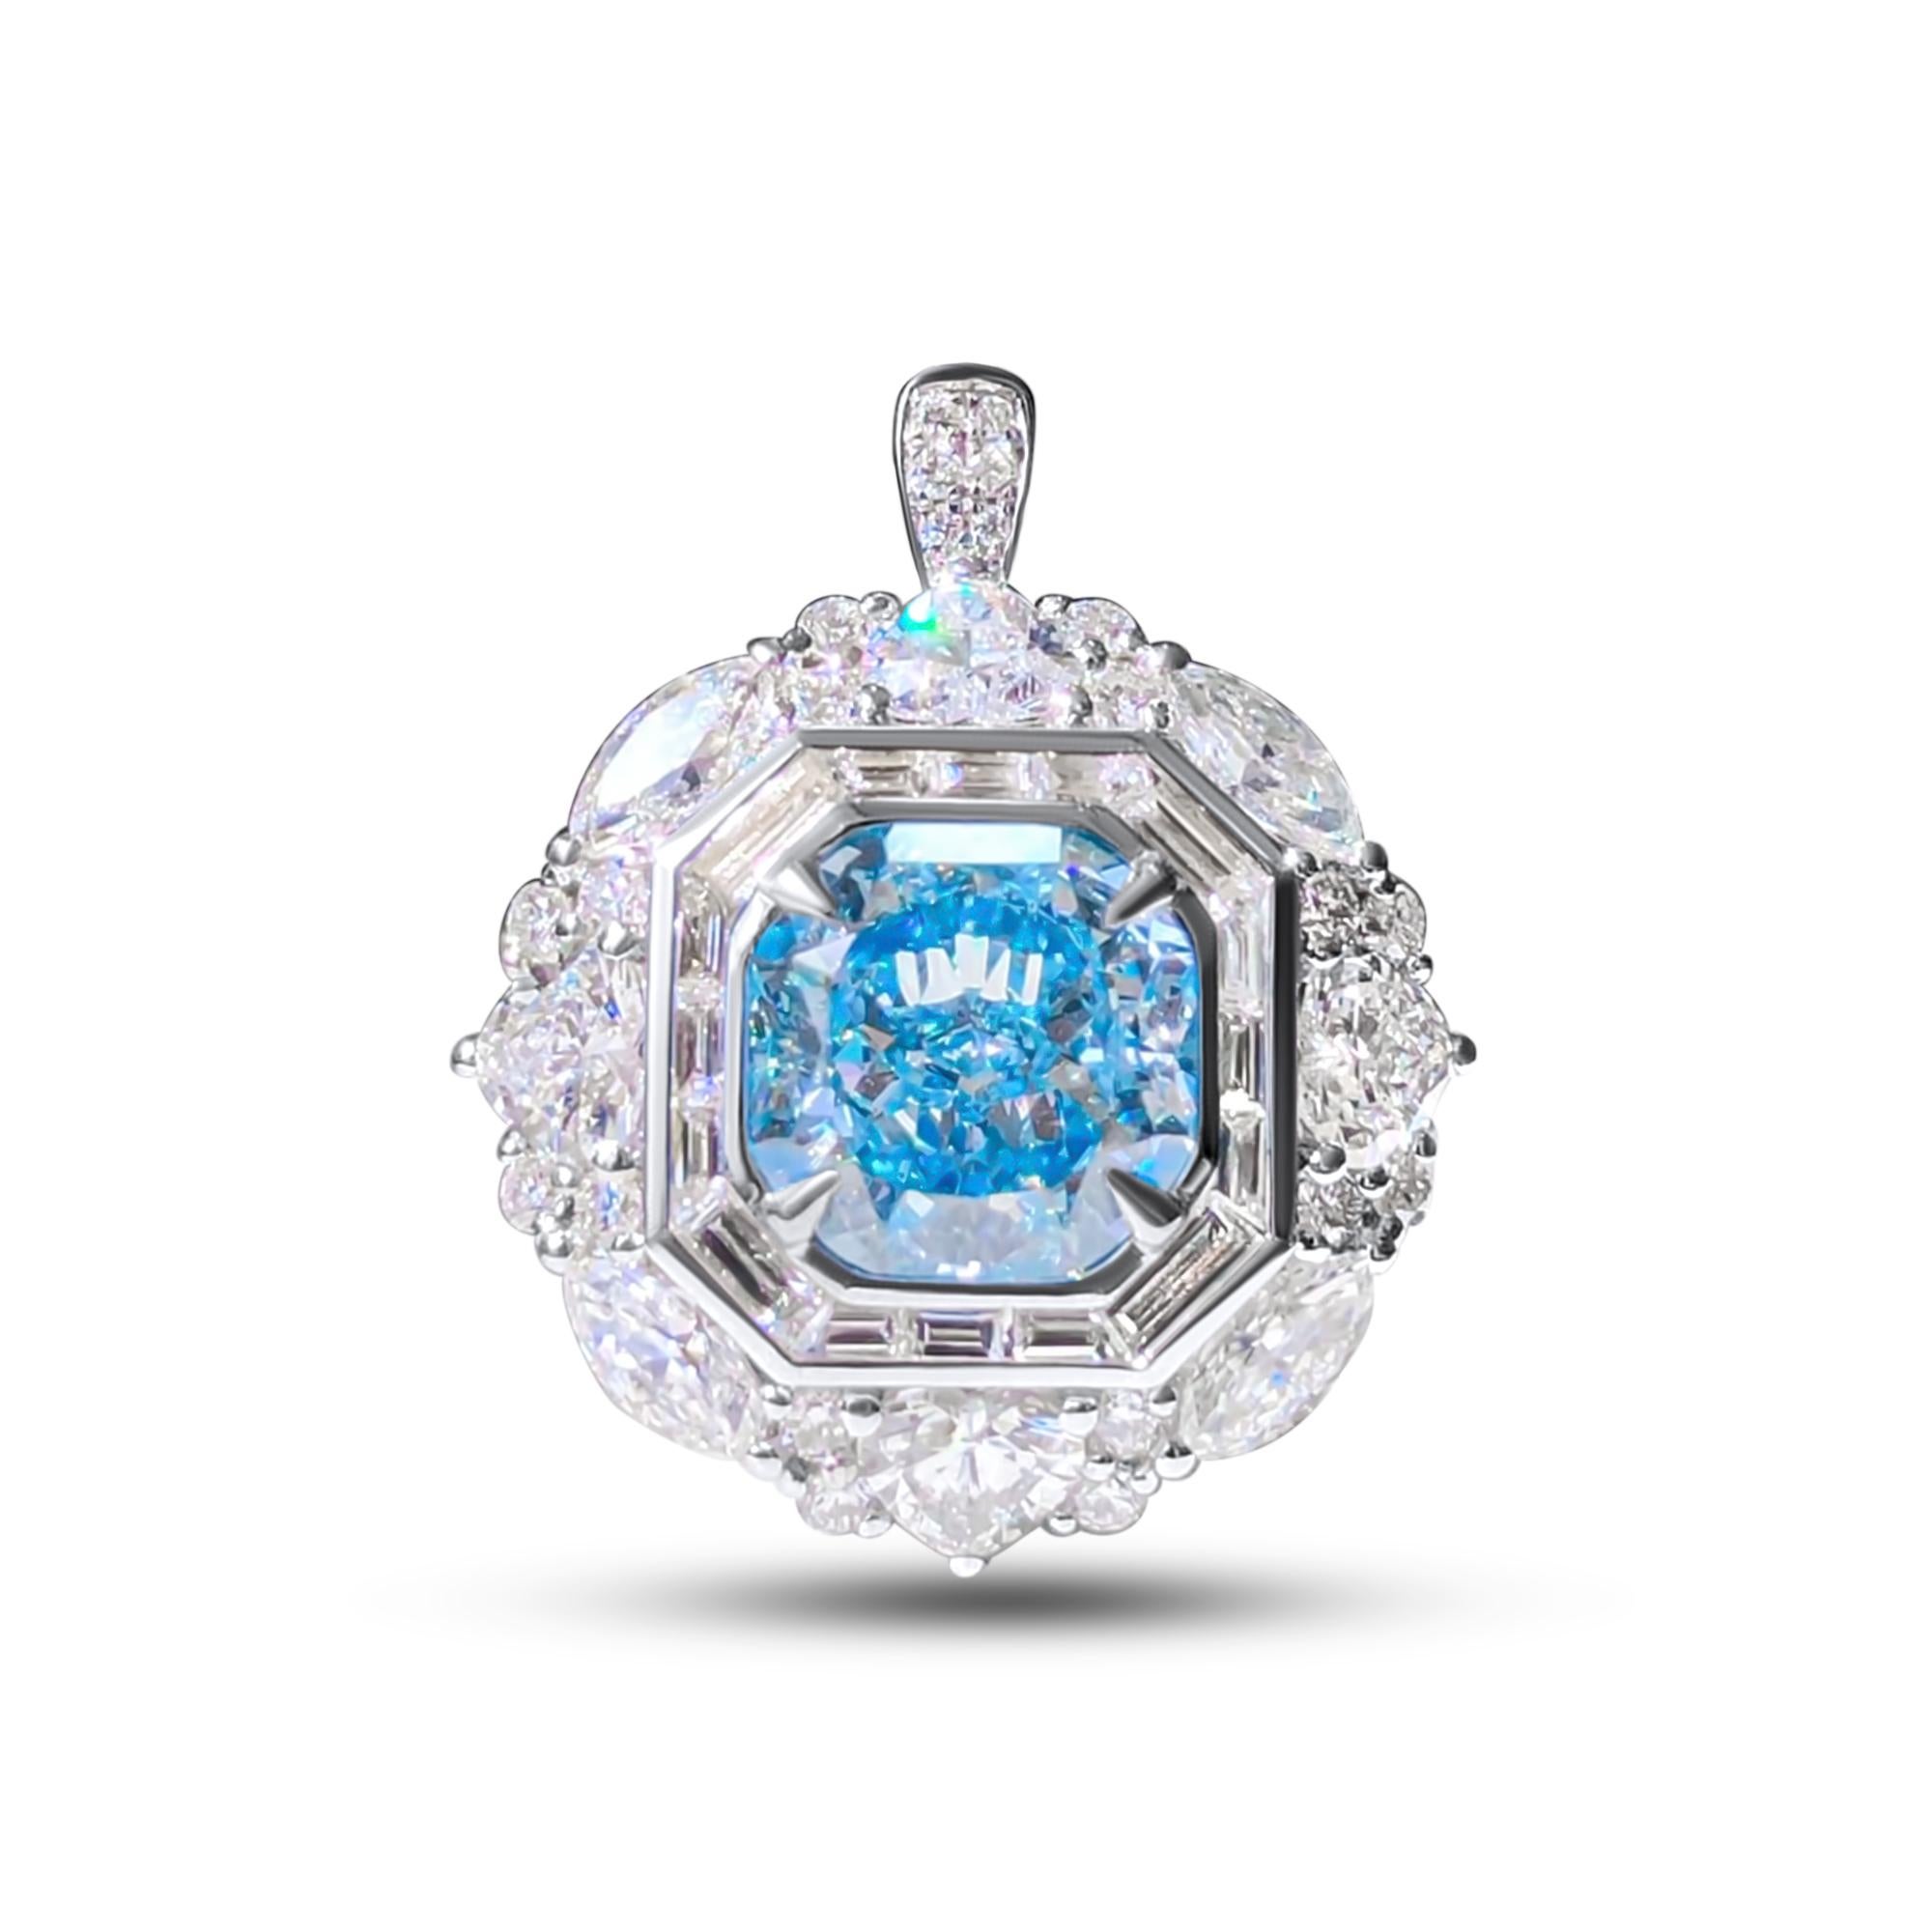 We invite you to discover this majestic pendant ring set with a 2.29-carat GIA-certified cushion-cut blue diamond accented with a baguette-cut white diamond halo, its heart-cut side diamonds add a romantic charm to this charming jewel. 

New ring